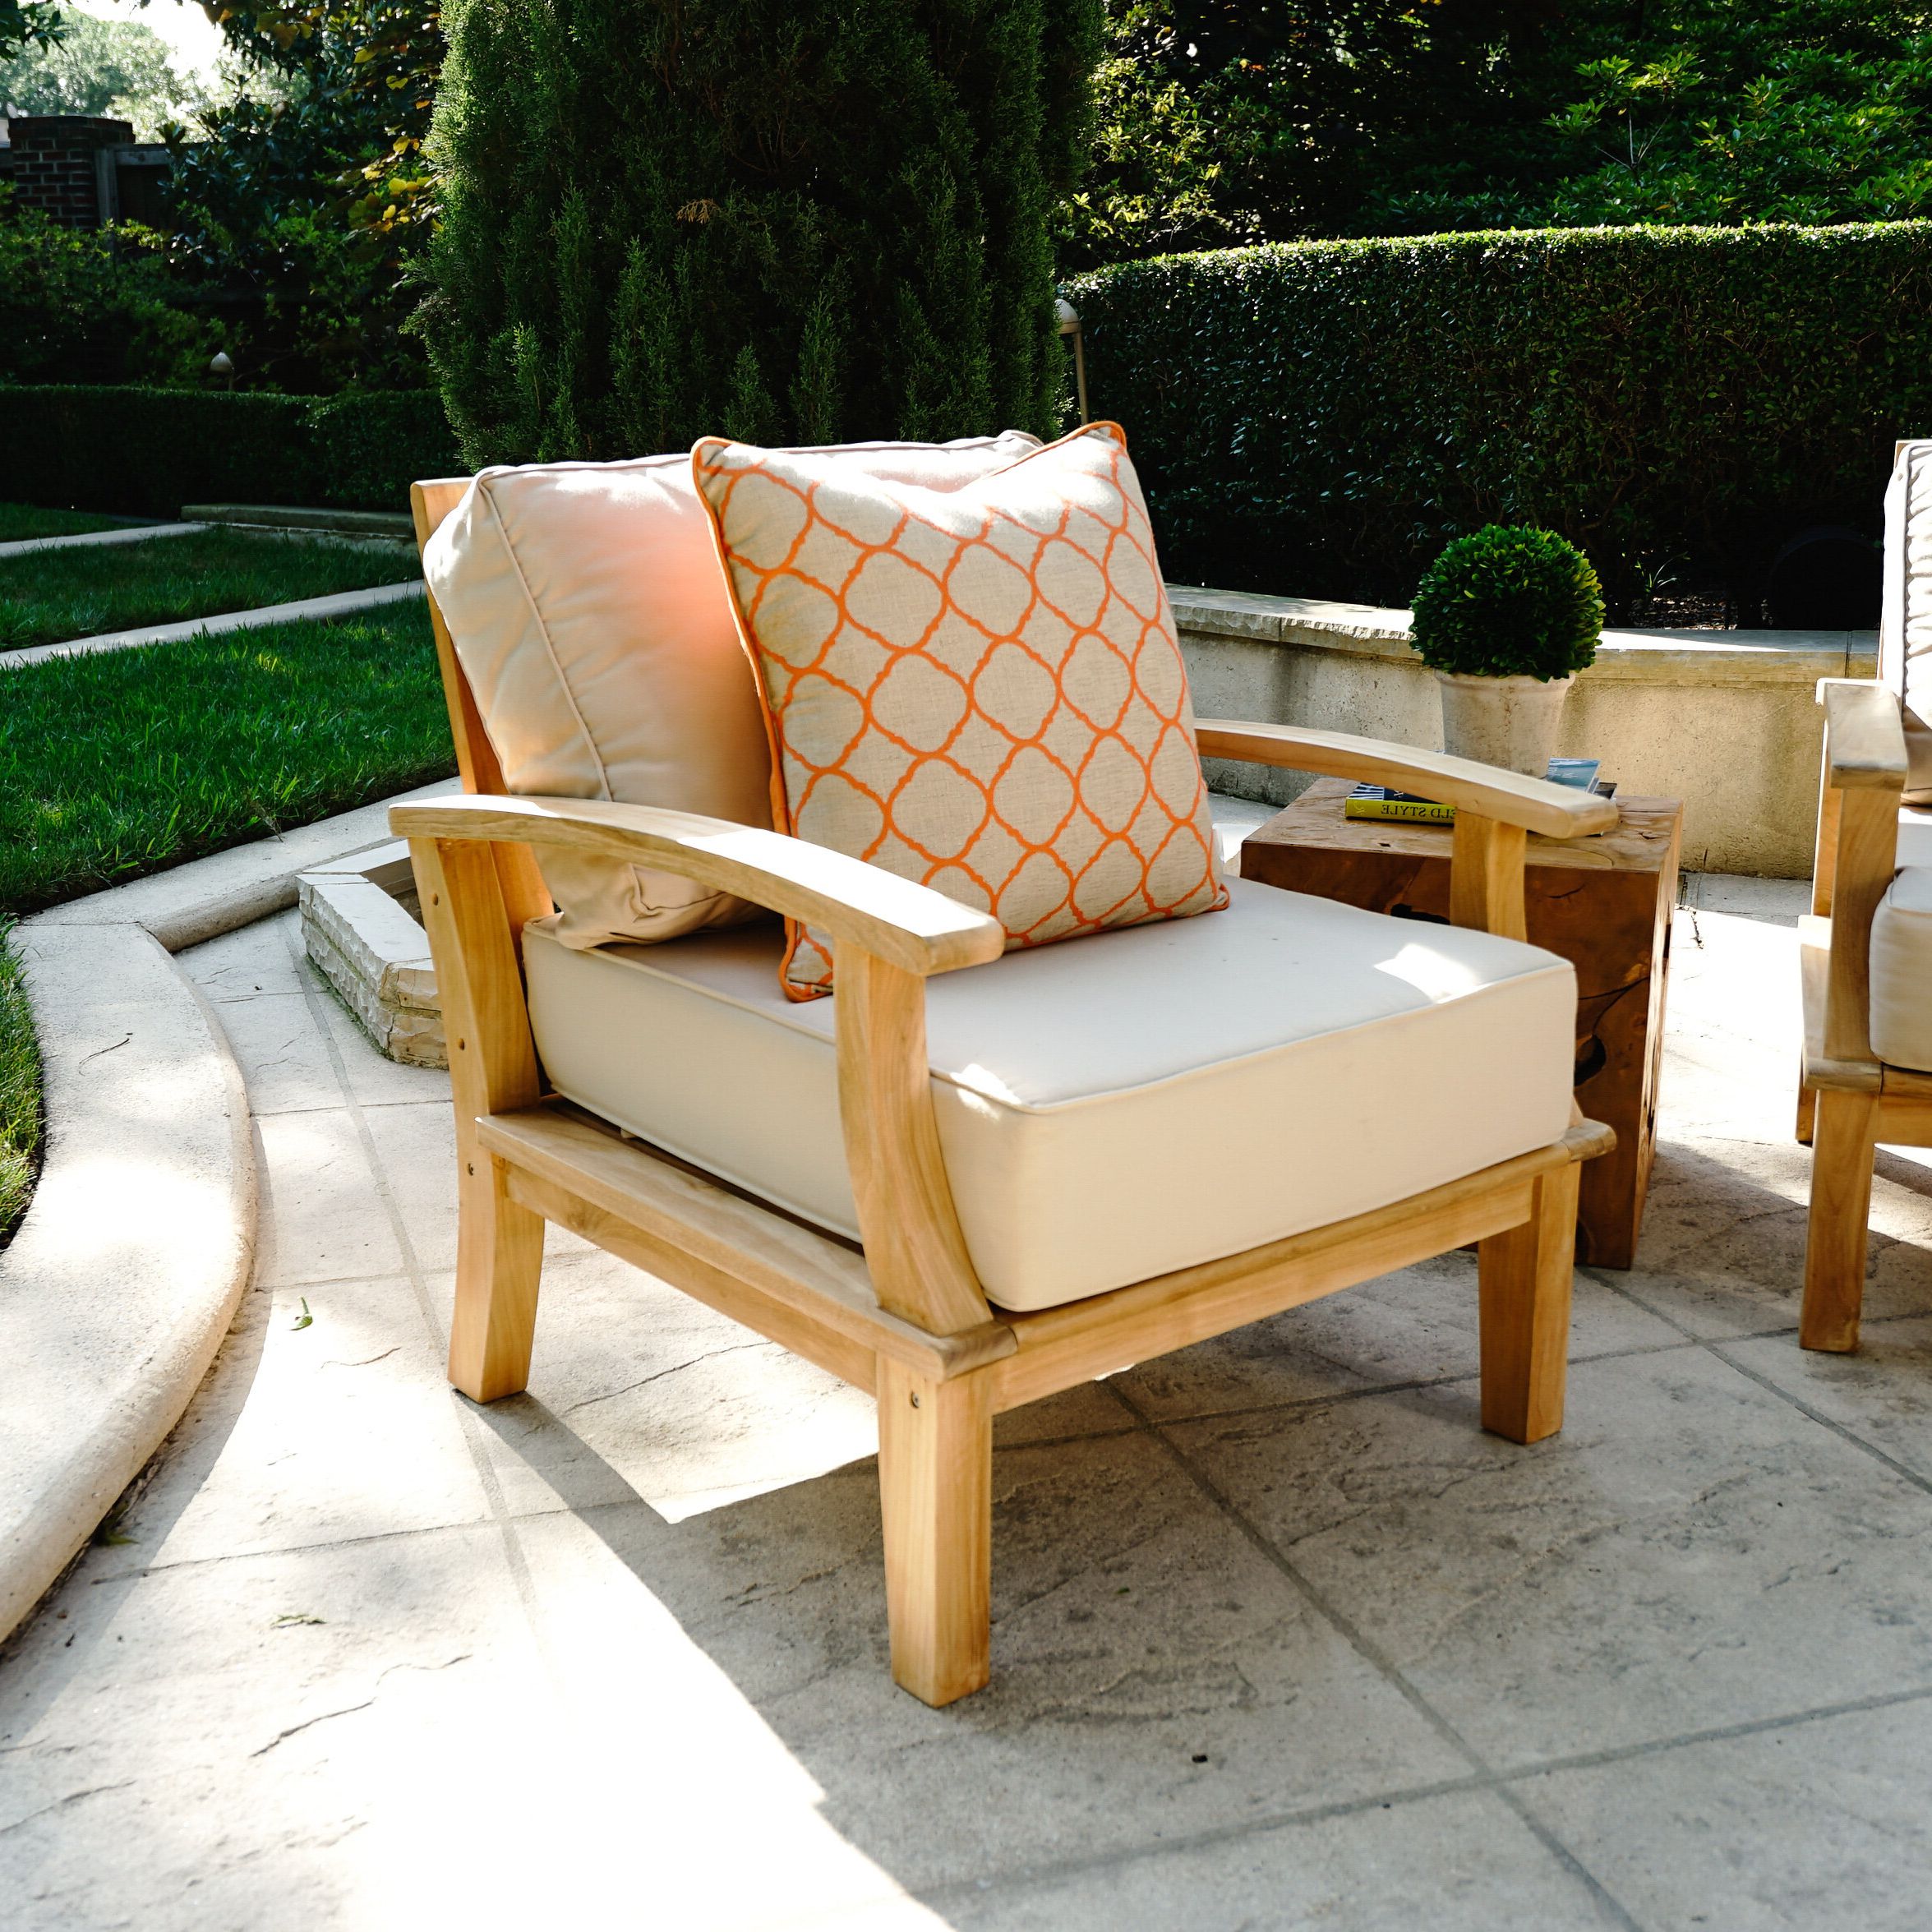 Galvan Outdoor Teak Patio Chair With Cushion Intended For Most Up To Date Brunswick Teak Patio Sofas With Cushions (View 16 of 25)